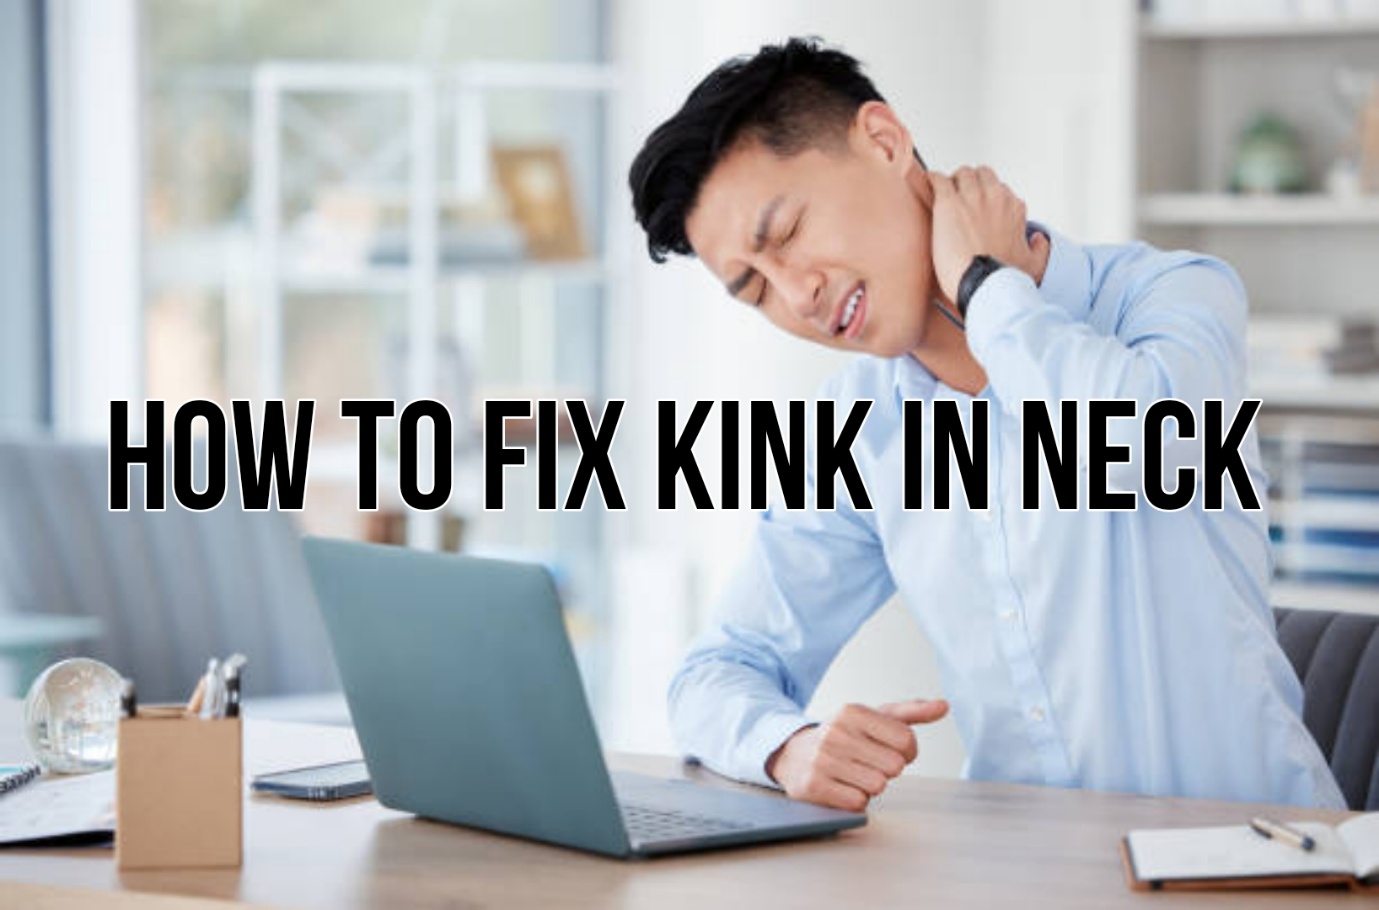 Stiffed Neck | How to fix kink in neck | When to see a doctor